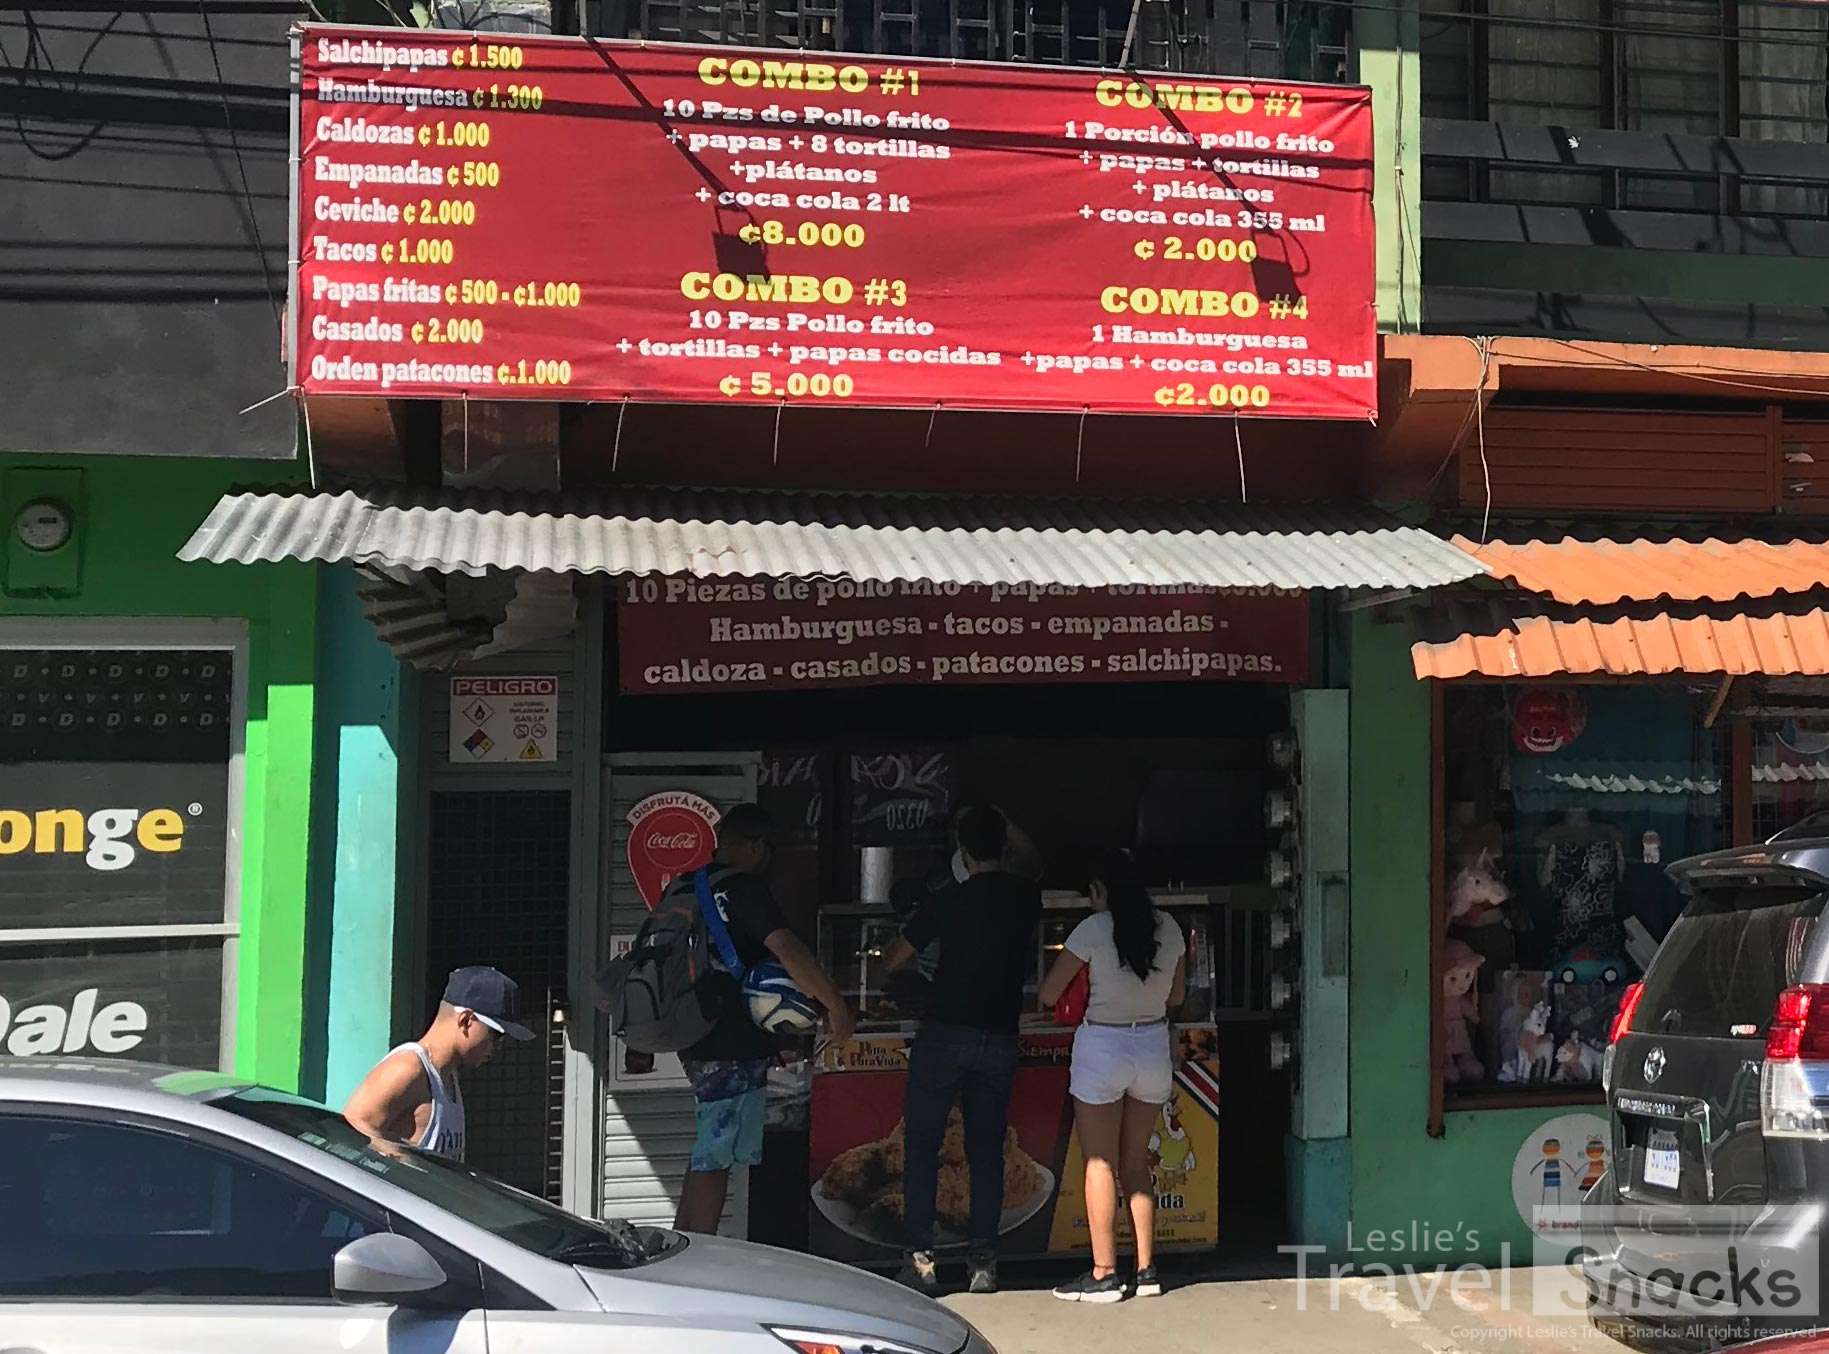 Here's an inexpensive place to get some food in Quepos. It's about 2 doors down from the bus terminal.